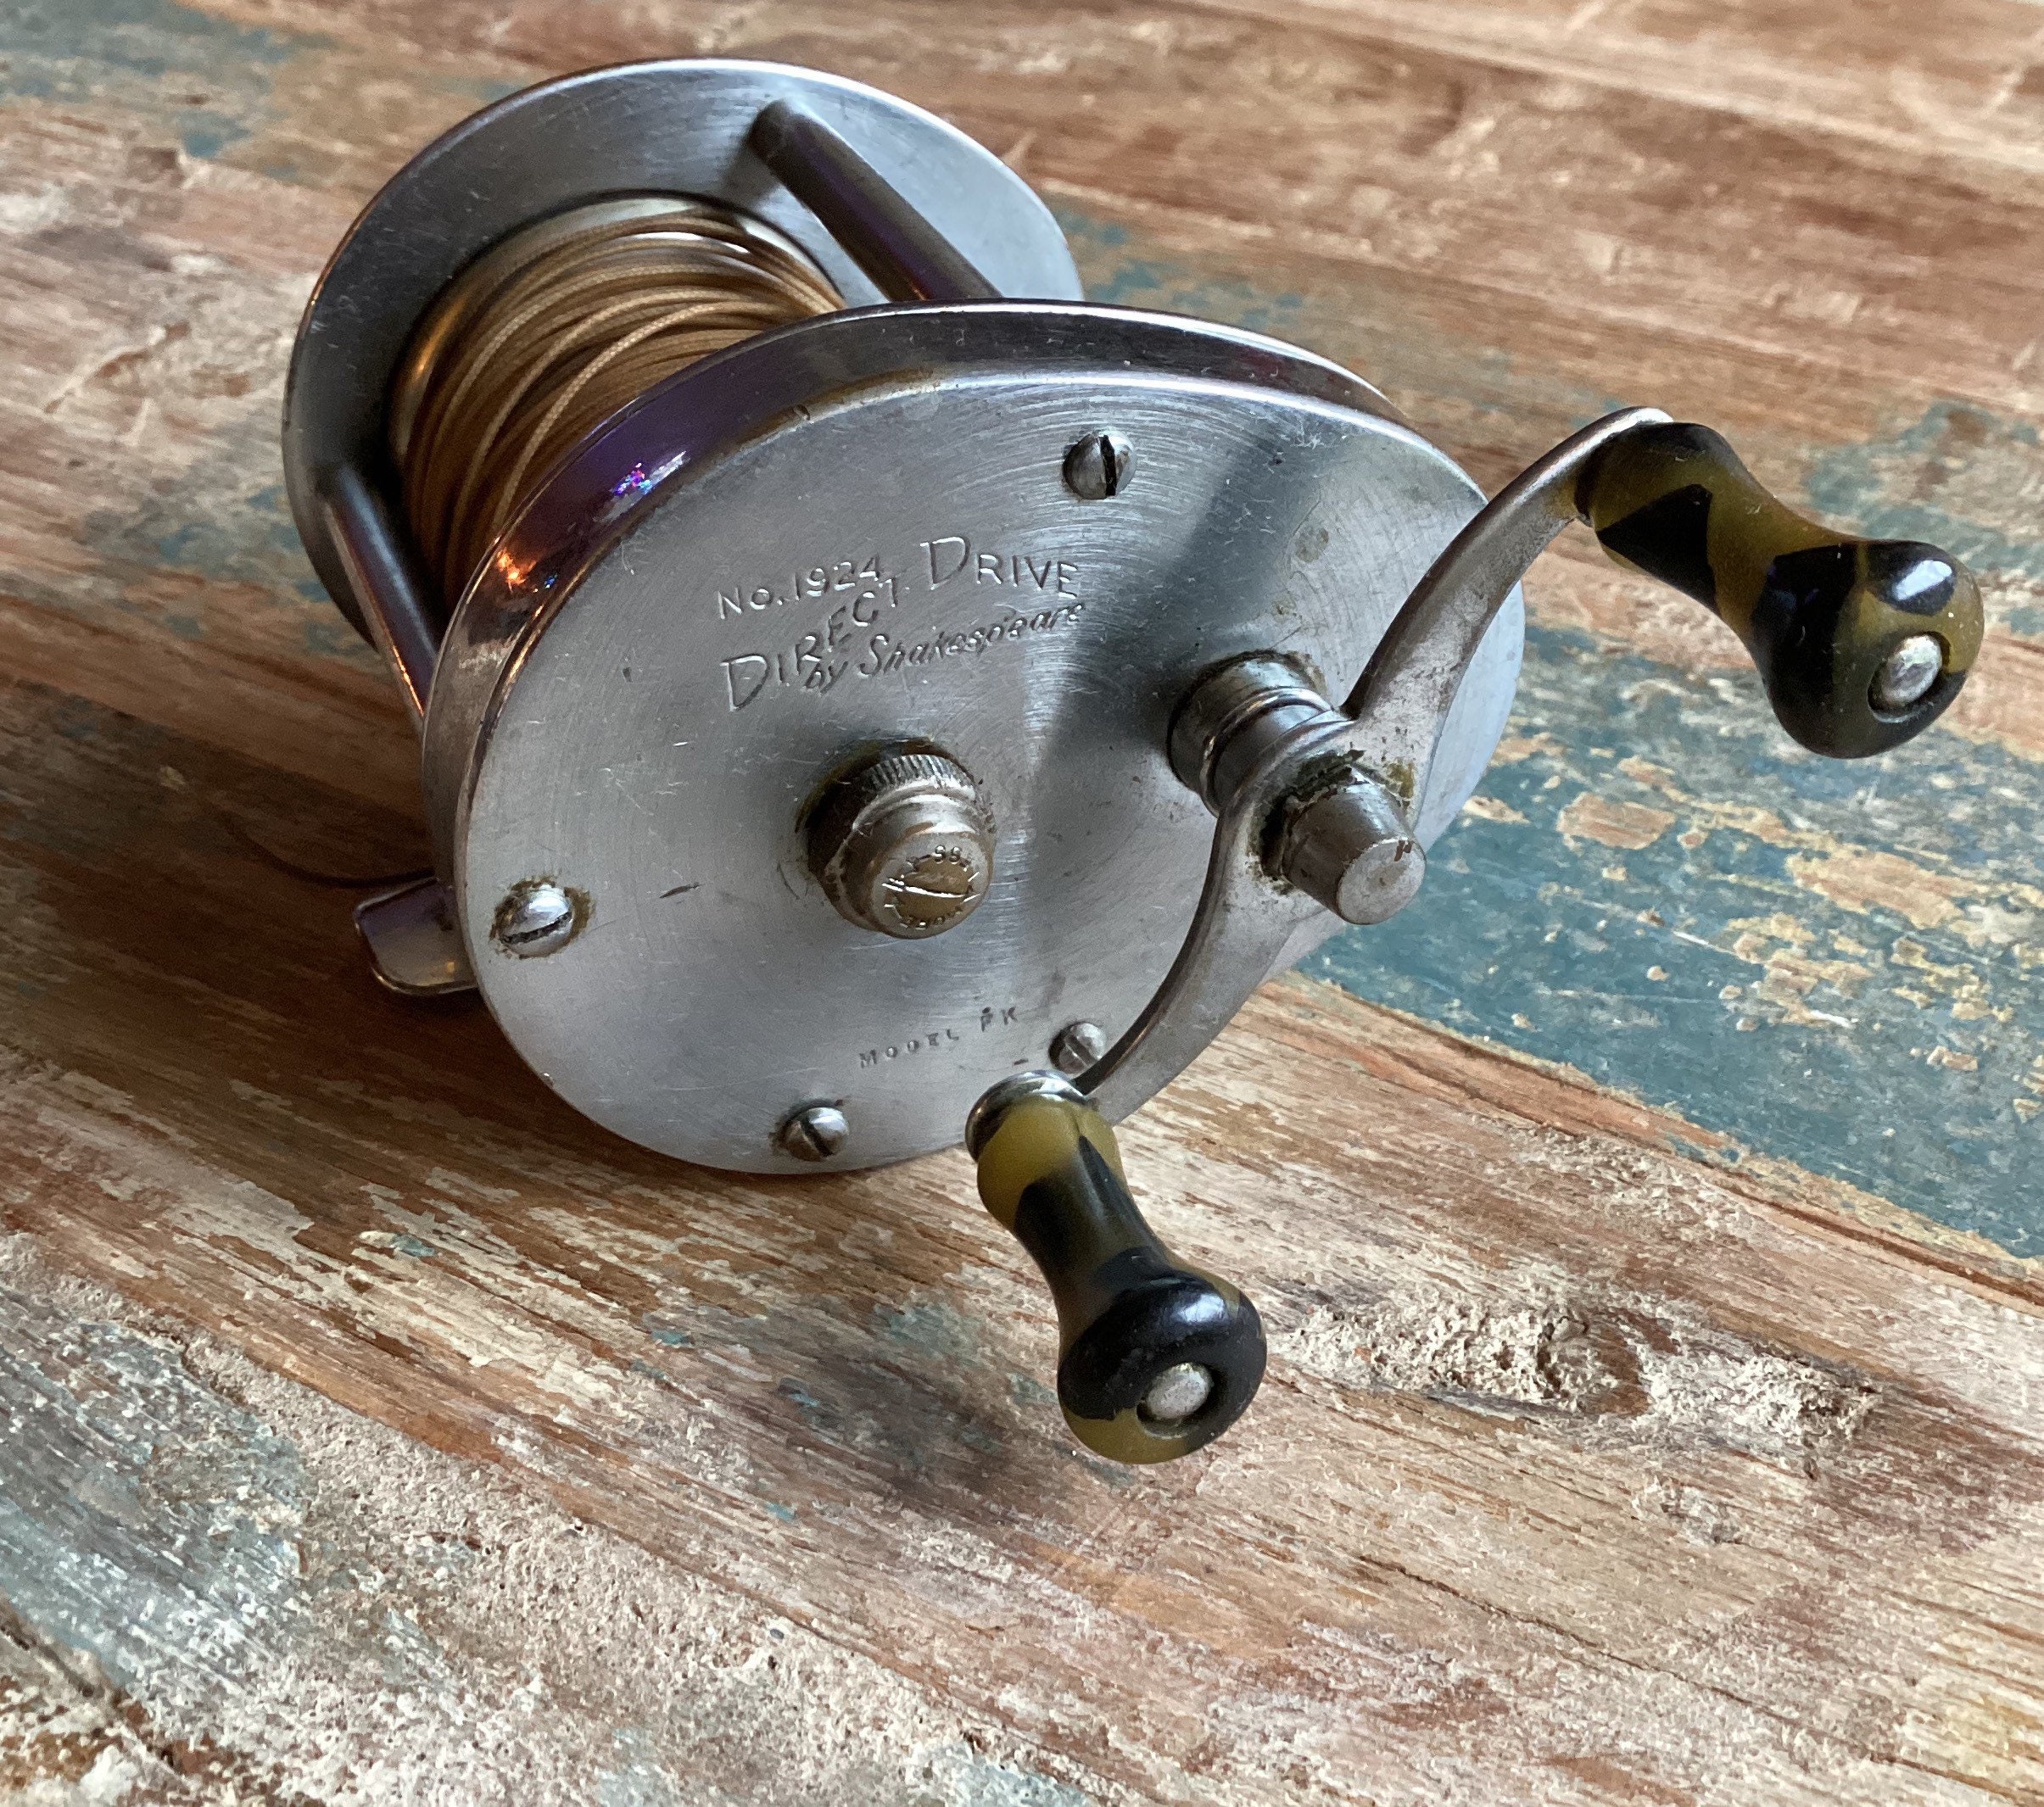 Shakespeare 1924 Direct Drive Fishing Reel Vintage Fishing Reel for Lures  Collectible Outdoor Sporting Goods USA Fish Retirement Gift 